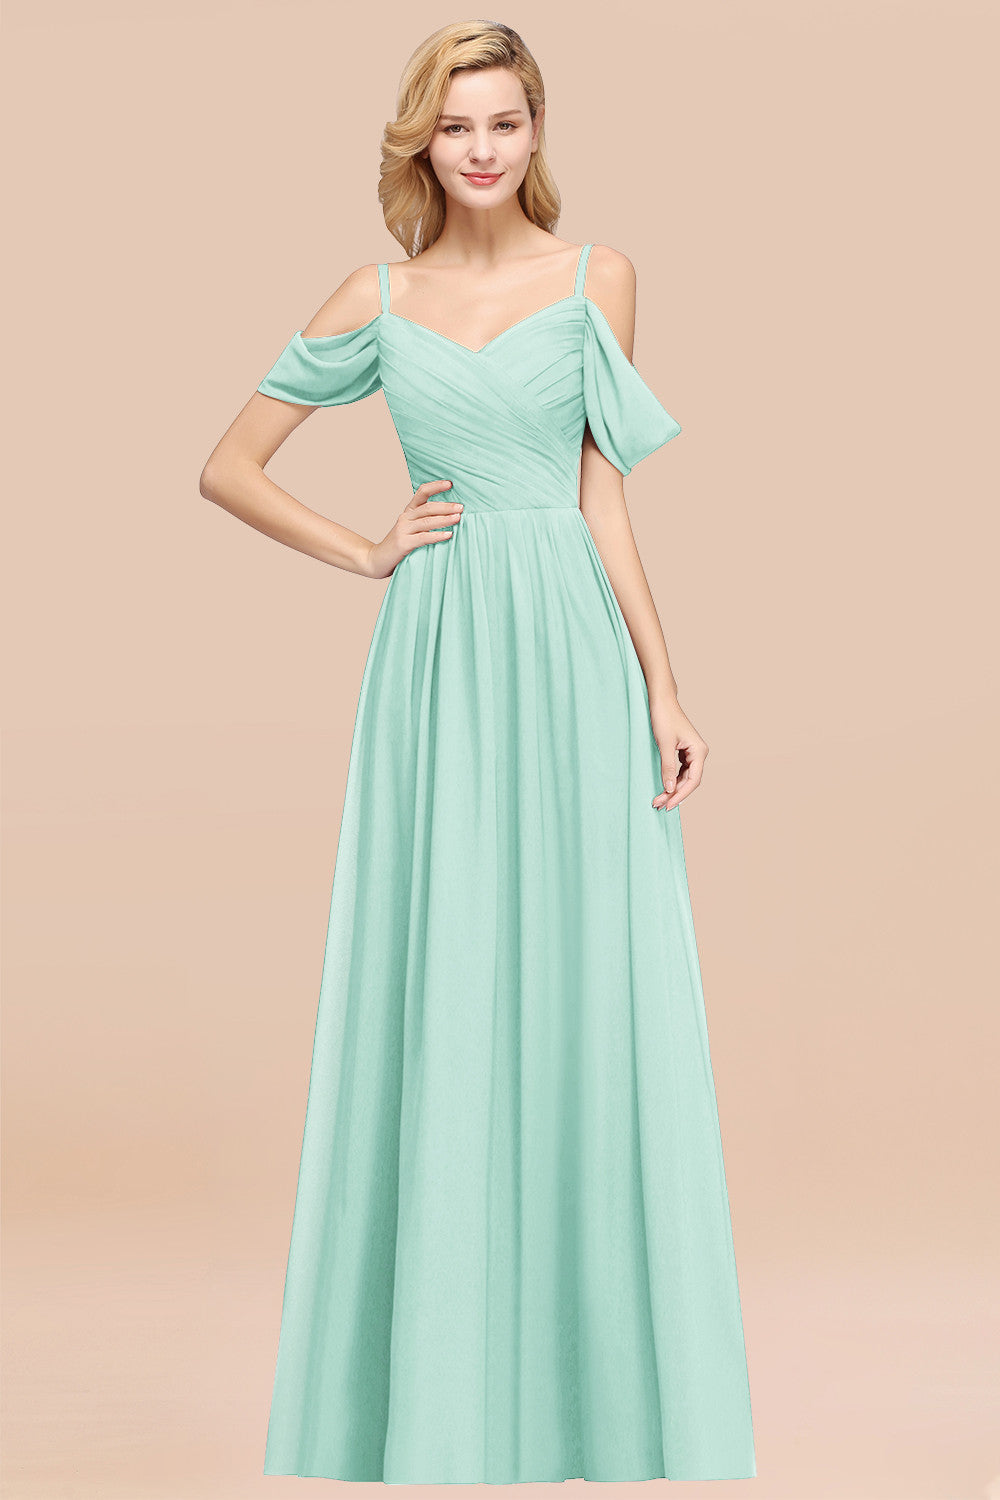 Load image into Gallery viewer, A-Line Chiffon V-Neck Spaghetti Straps Ruffles Long Bridesmaid Dresses with Sleeves-BIZTUNNEL
